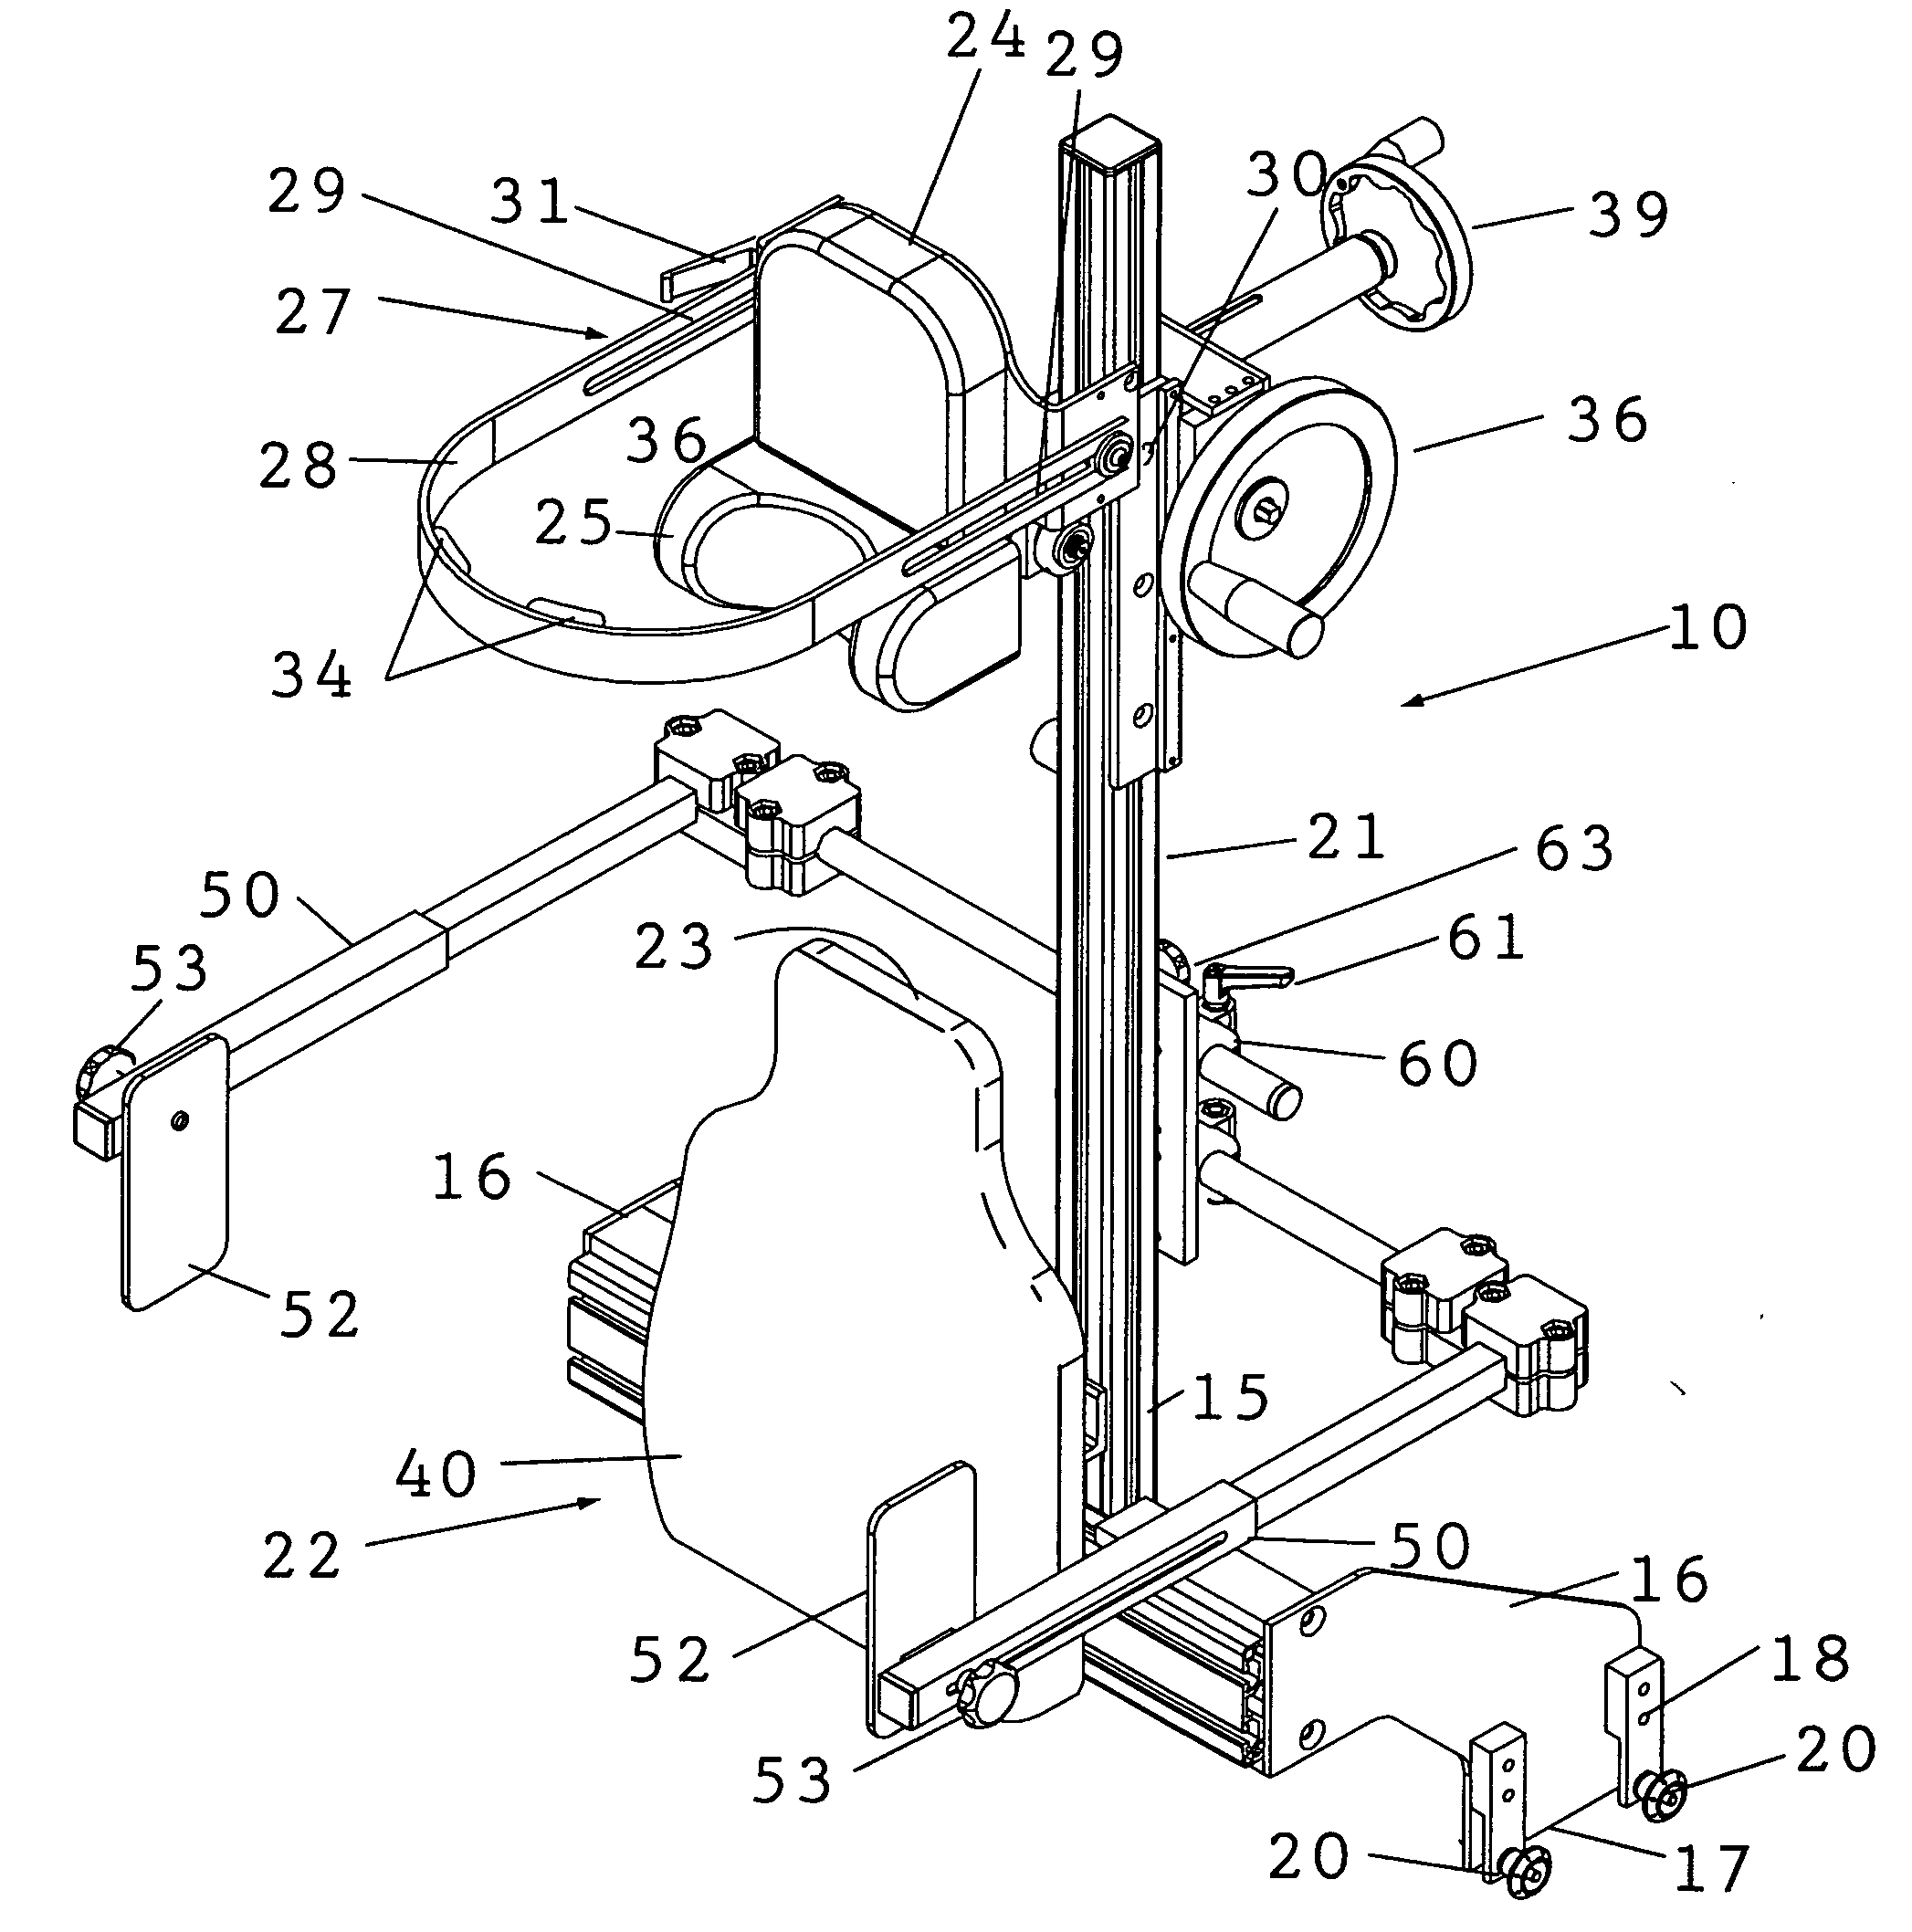 Shoulder surgery attachment for a surgical table